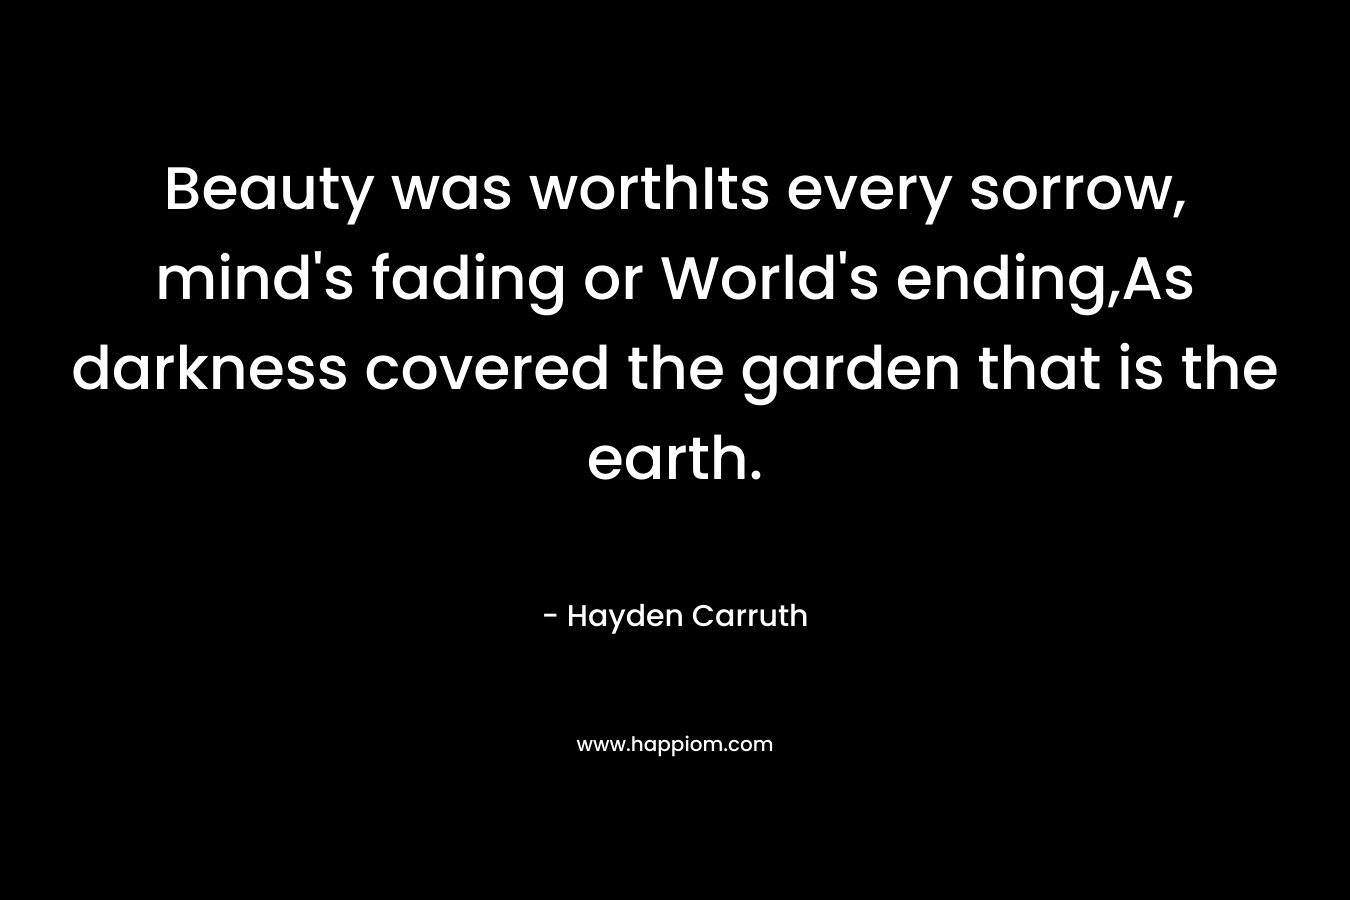 Beauty was worthIts every sorrow, mind’s fading or World’s ending,As darkness covered the garden that is the earth. – Hayden Carruth